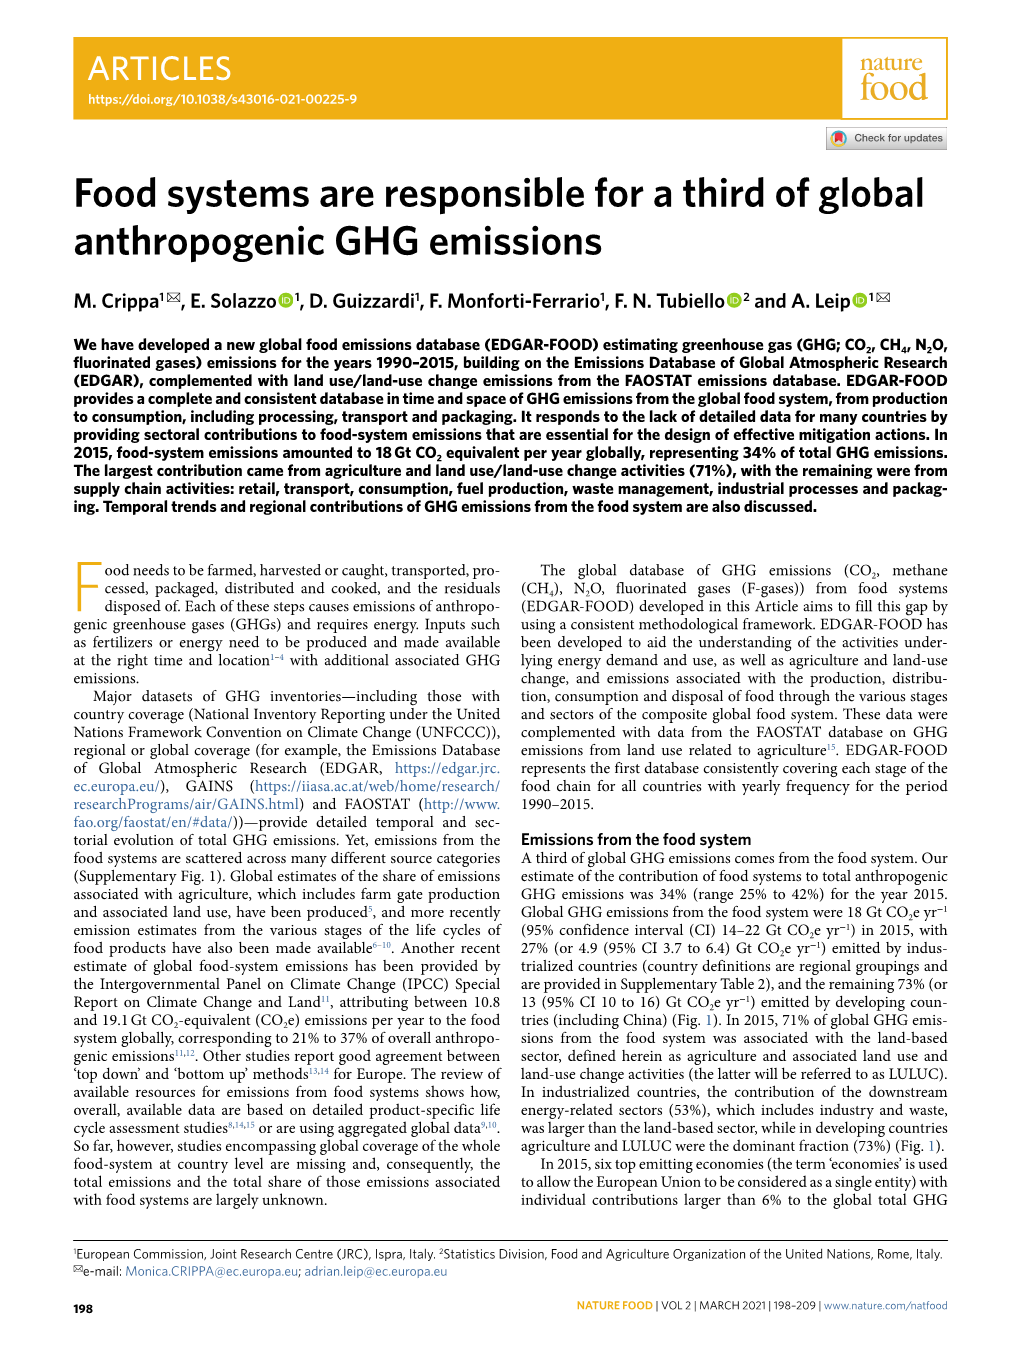 Food Systems Are Responsible for a Third of Global Anthropogenic GHG Emissions